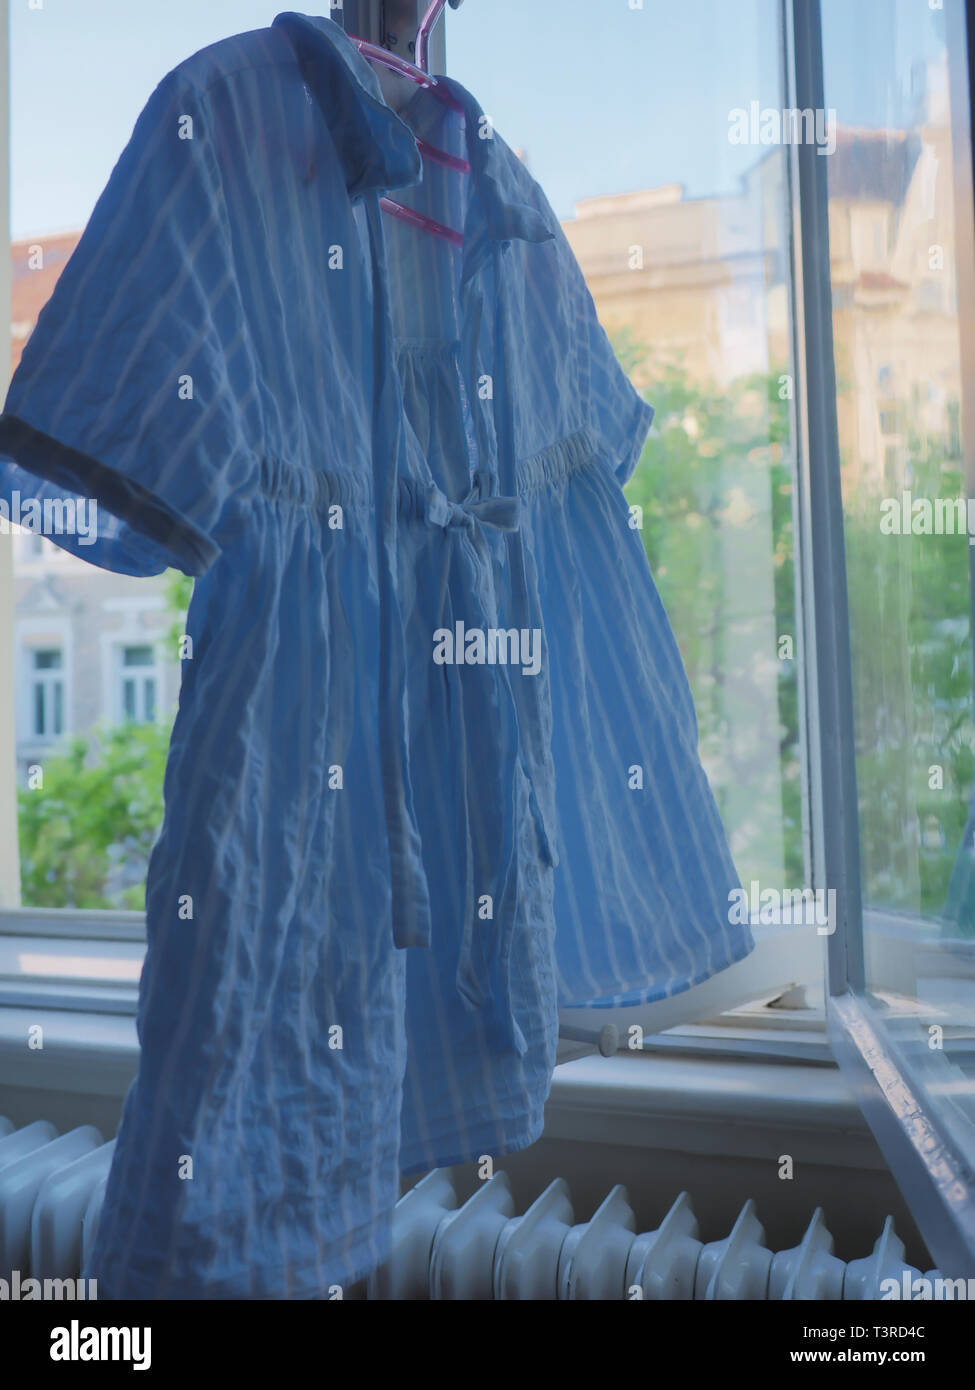 A girls blue summer shirt hanging to dry in the window Stock Photo